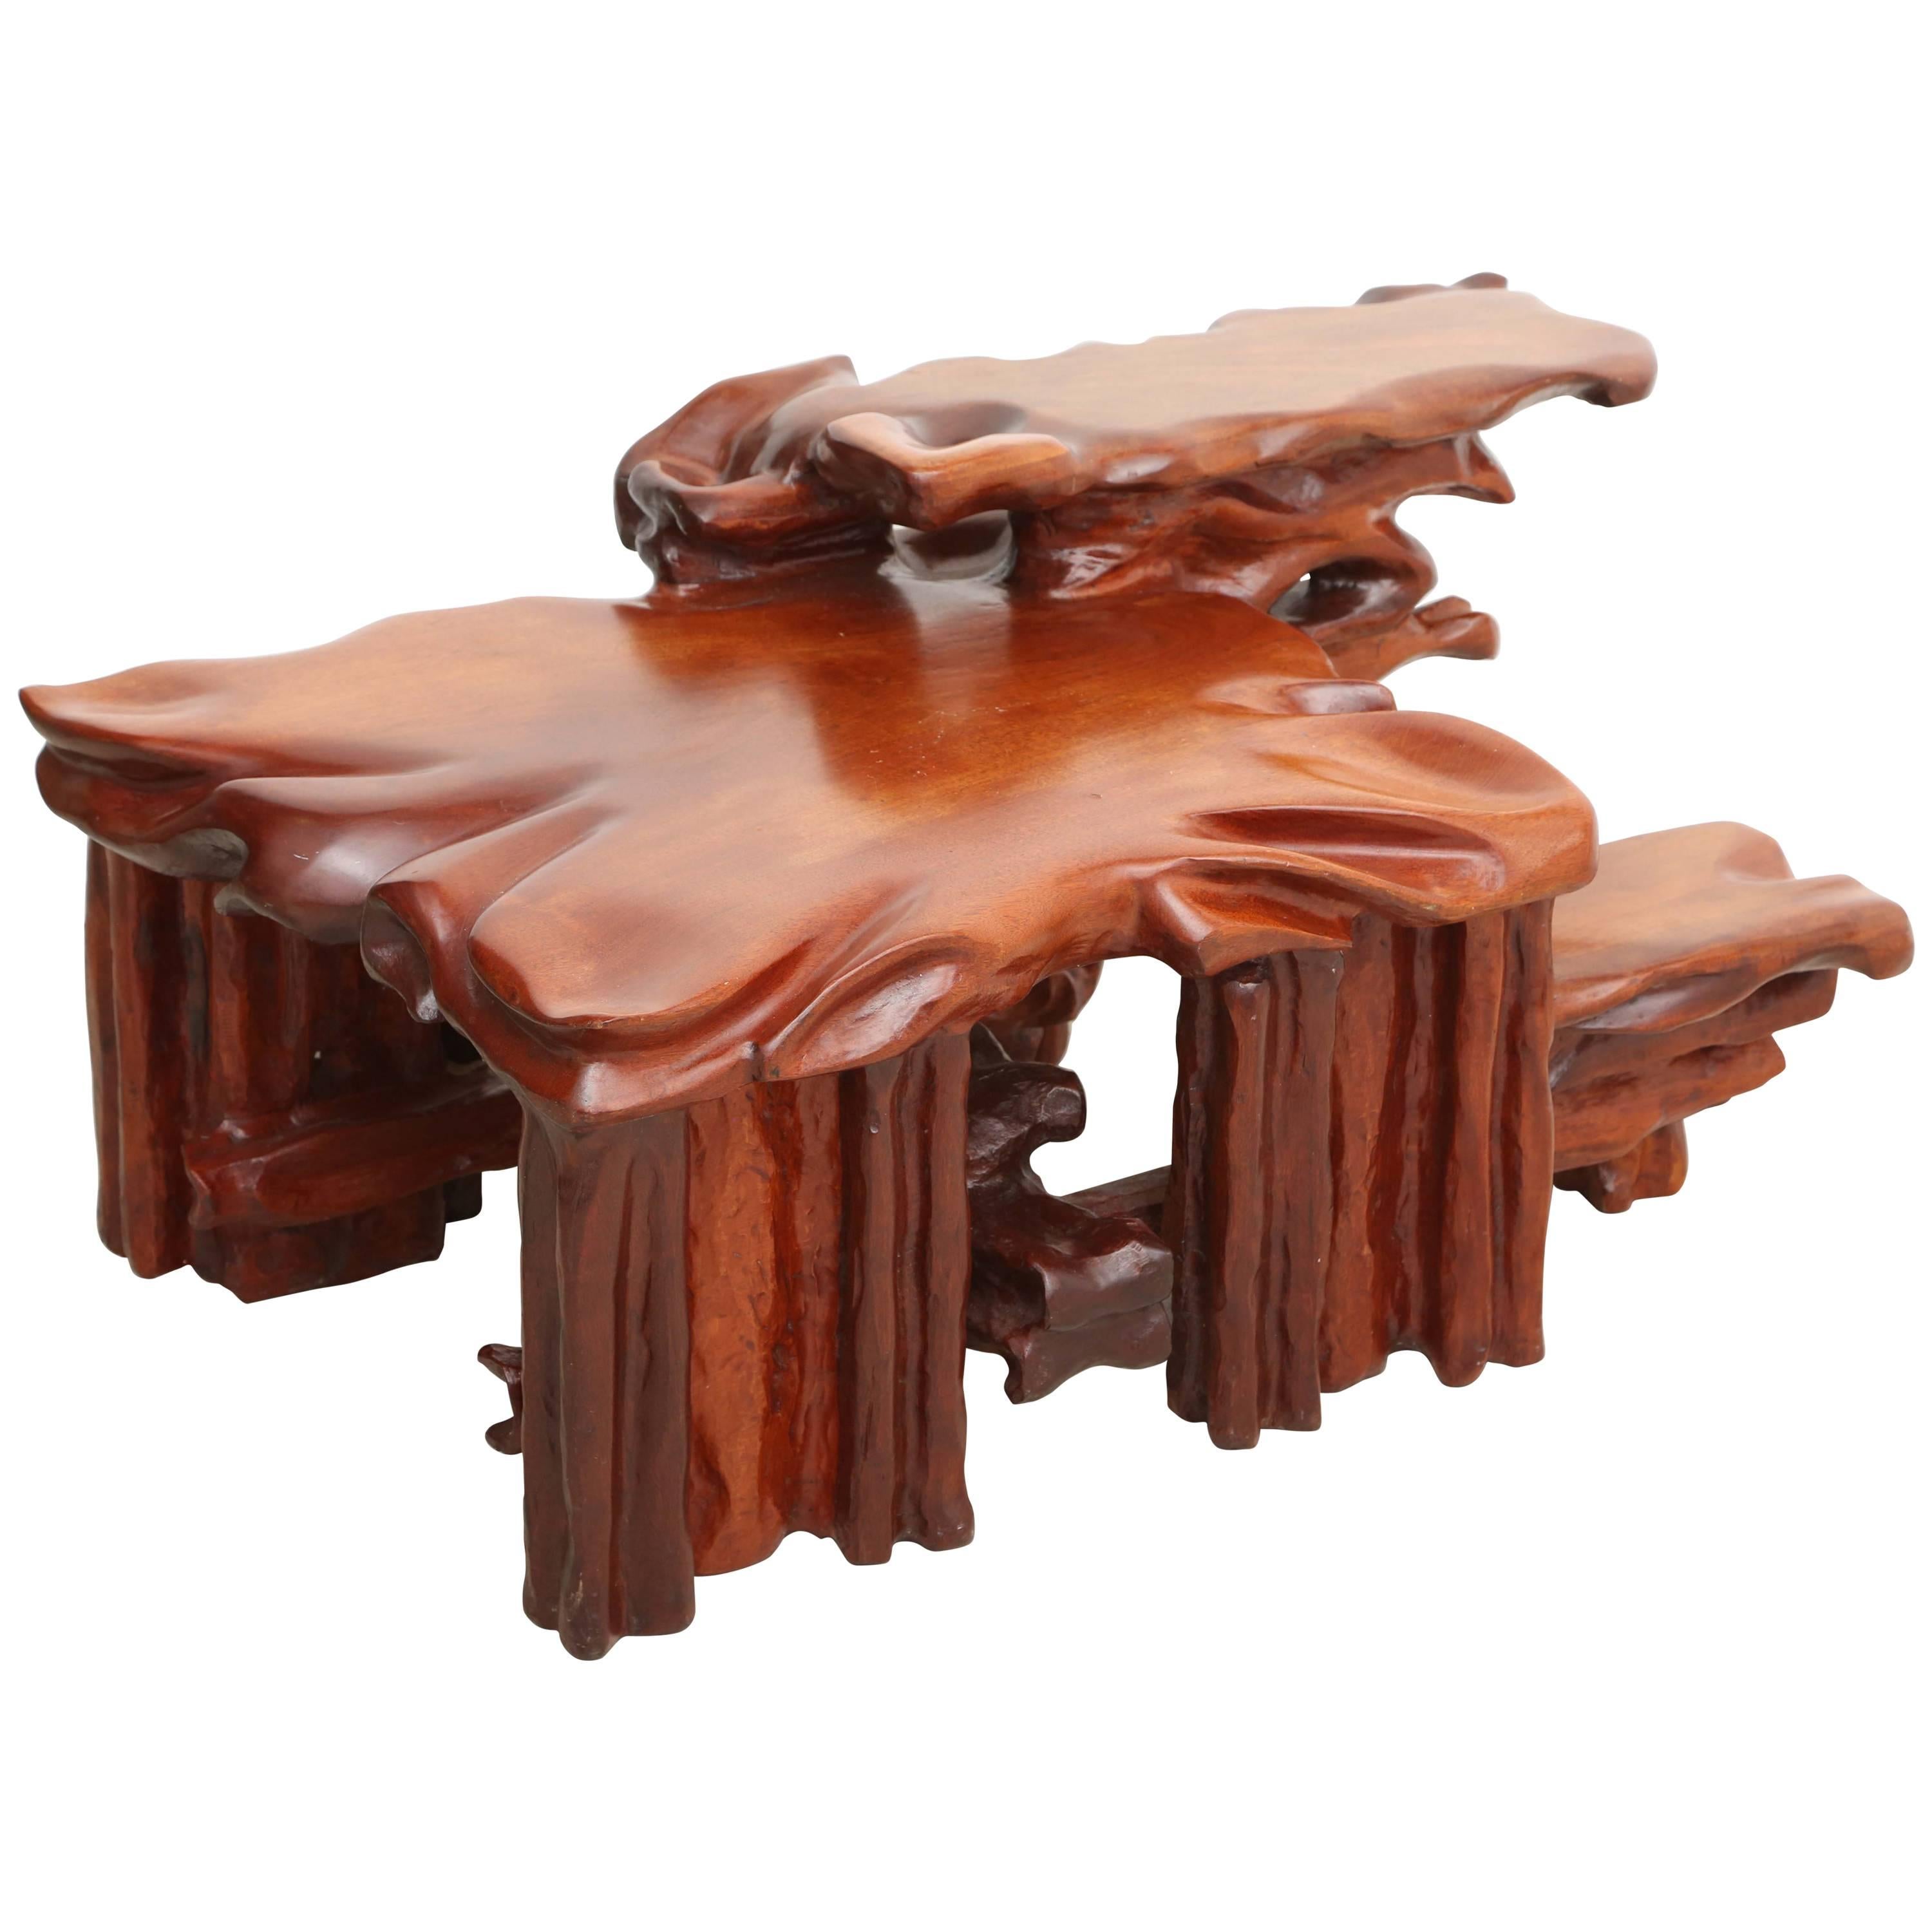 Organic Carved Coffee Table